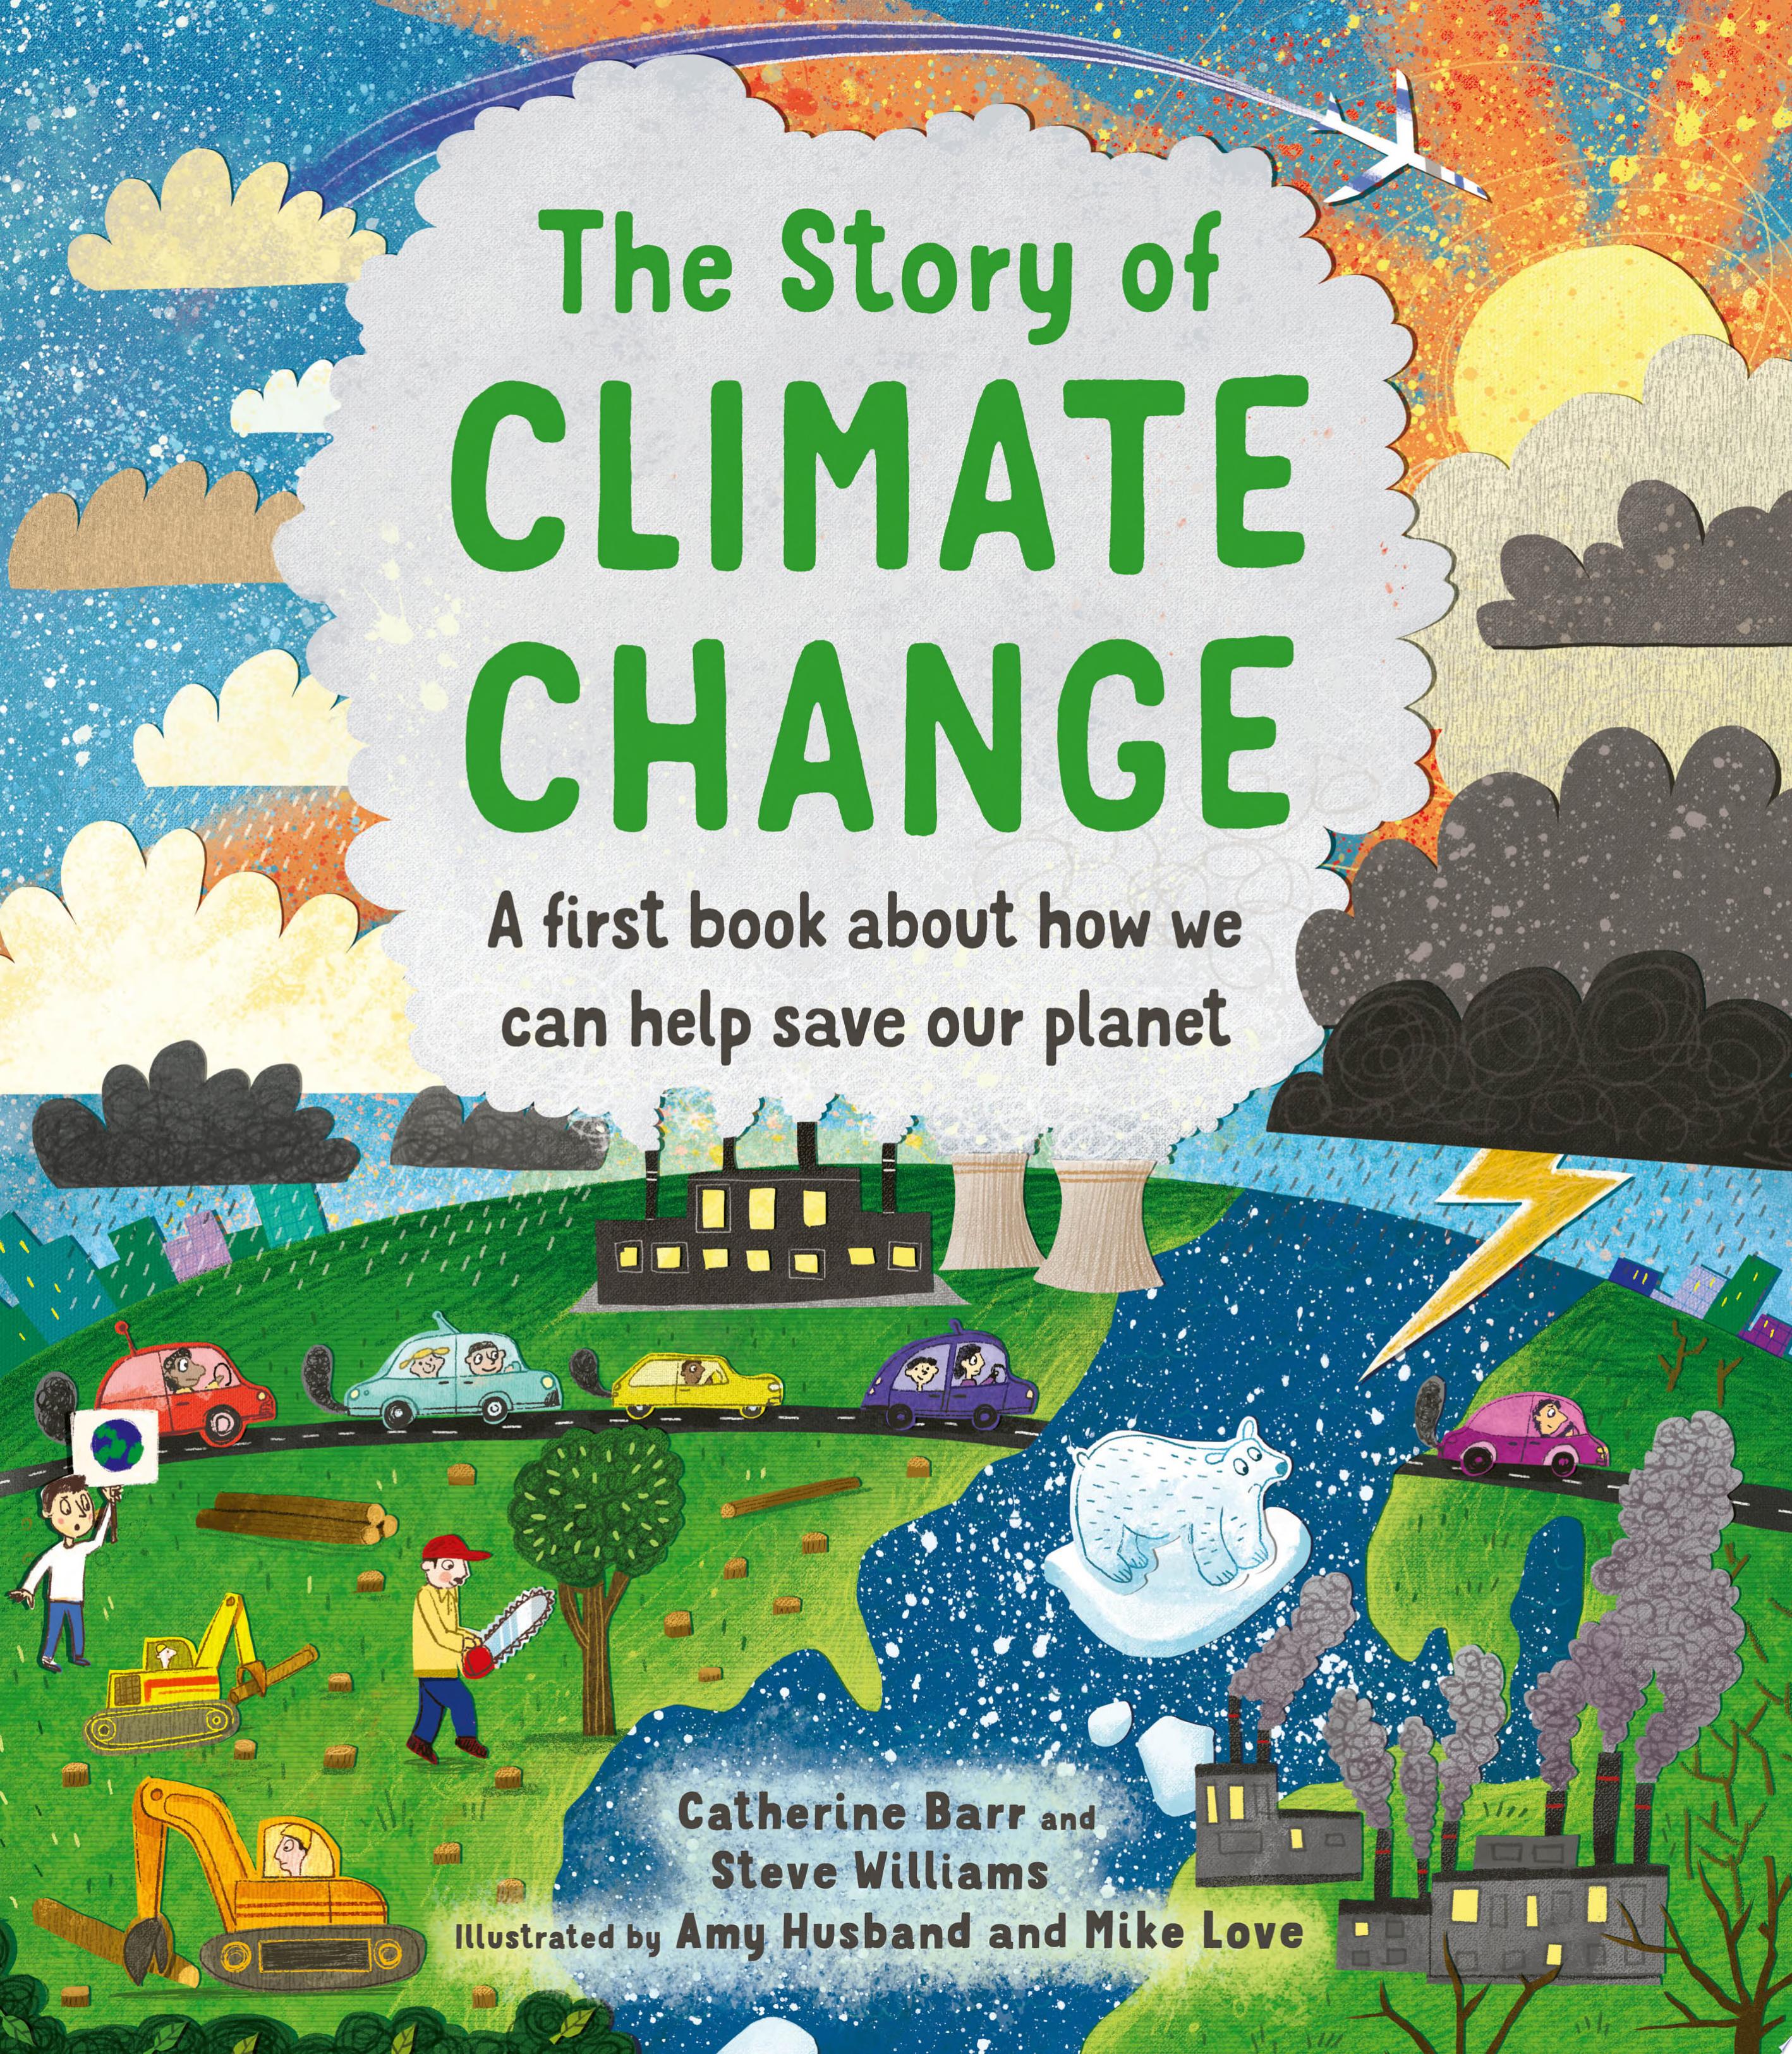 Image for "The Story of Climate Change"